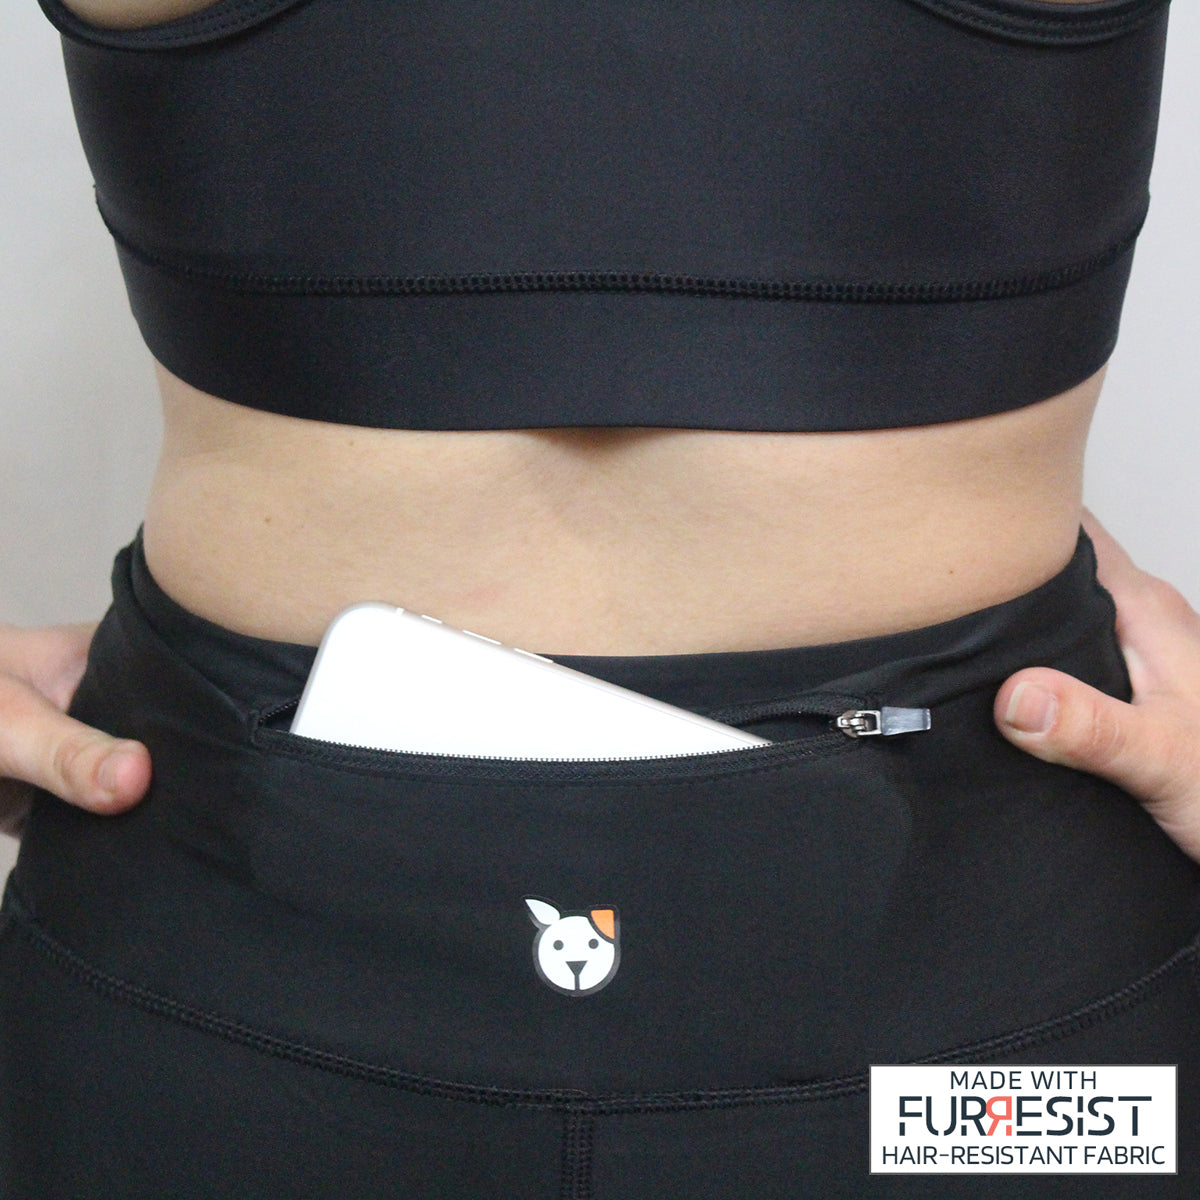 Loyalty pet products “WINTER IS COMING” Special Edition Compression Shorts and Skirts with FuRResist